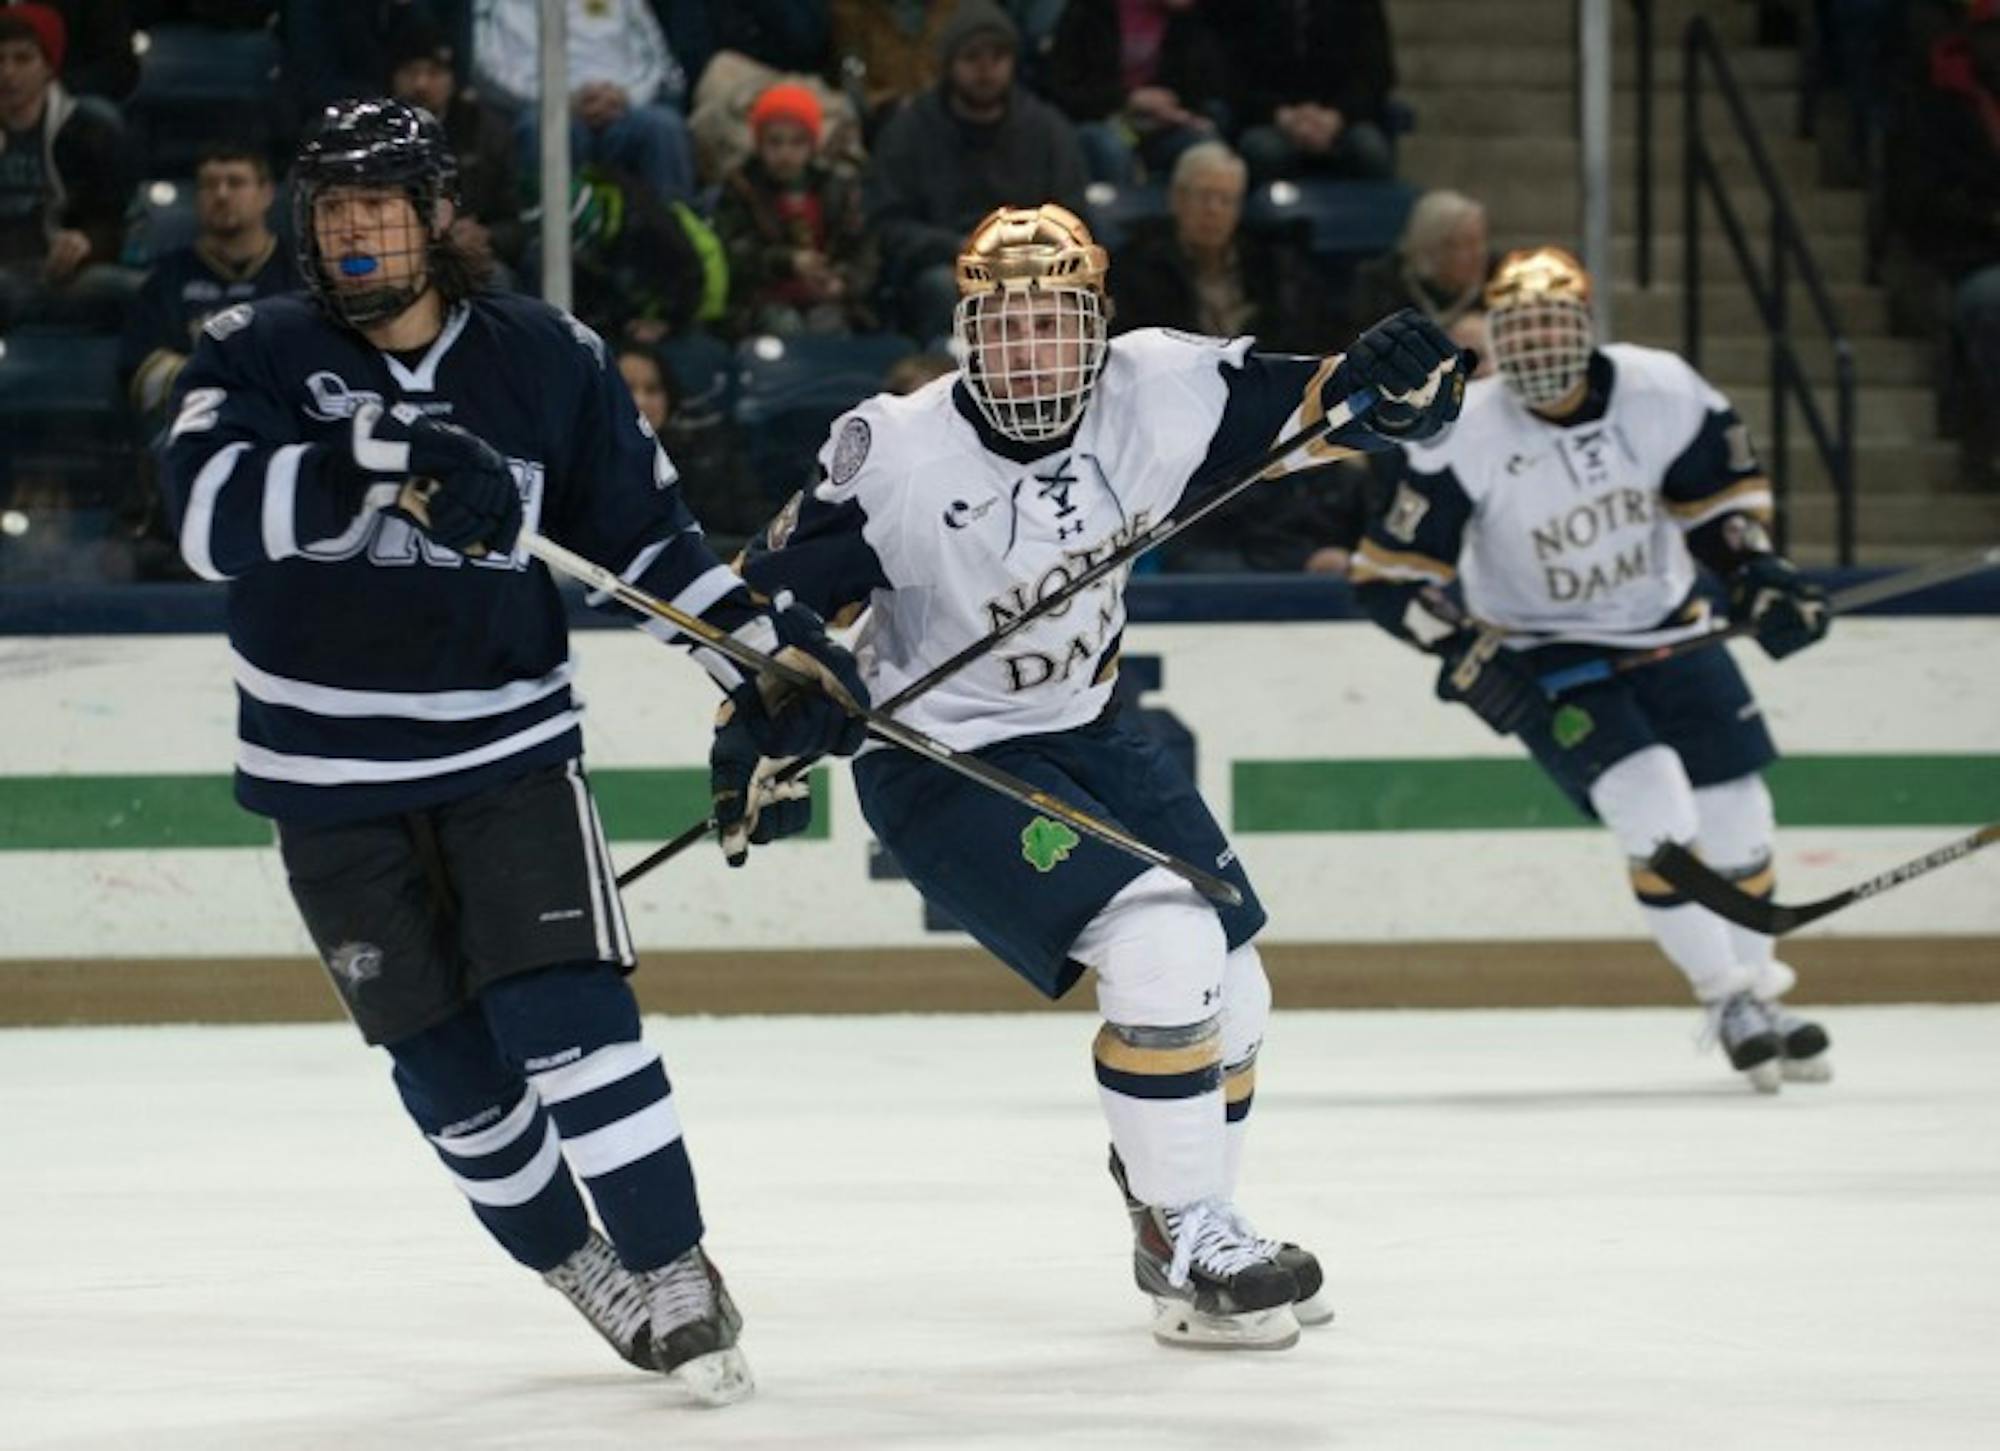 Sophomore right winger Ben Ostlie skates during Notre Dame's 5-2 loss to New Hampshire on Jan. 30 at Compton Family Ice Arena.